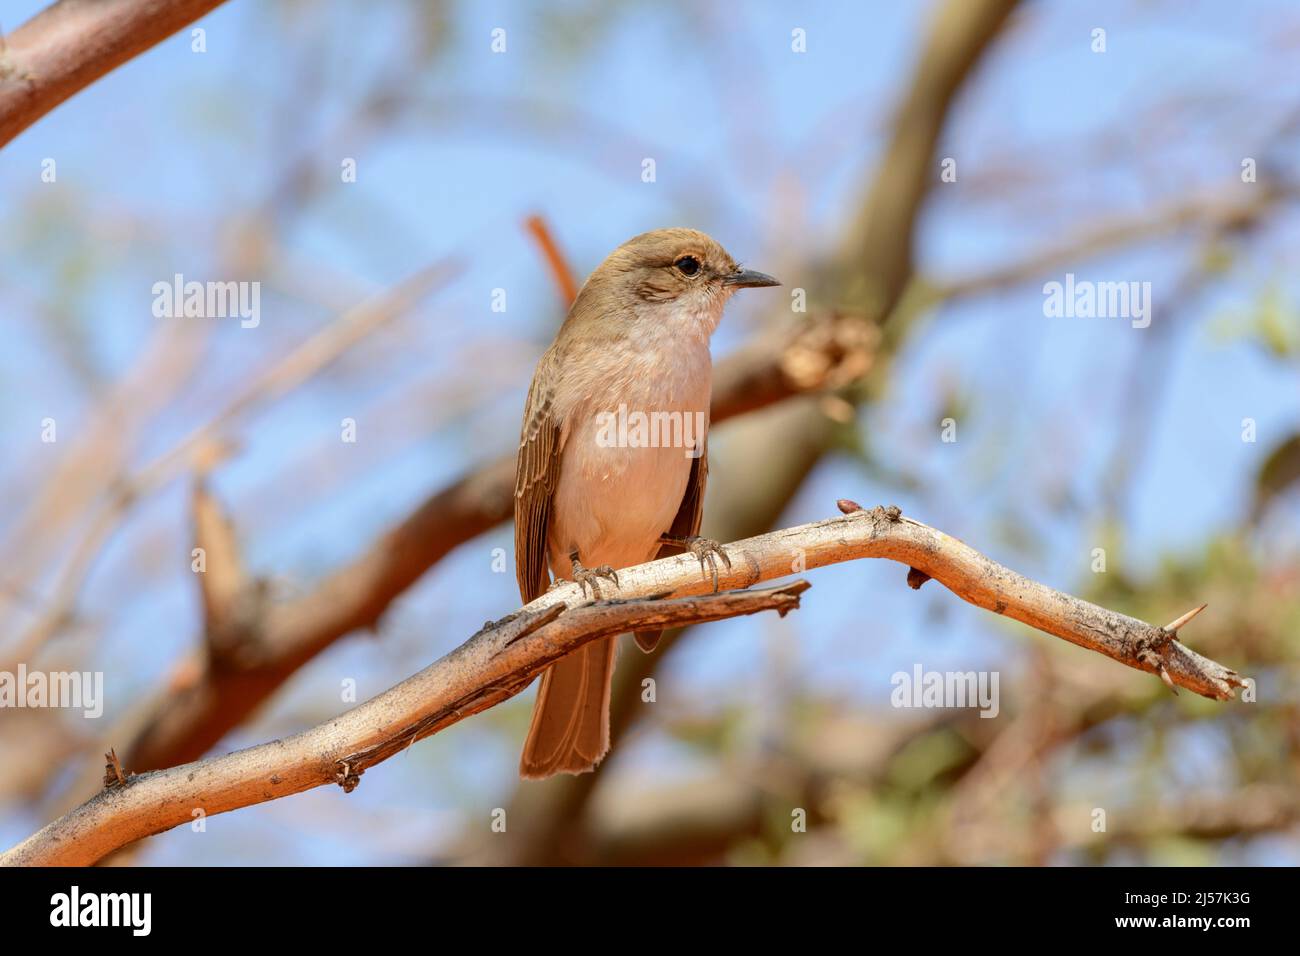 Pale Flycatcher (Melaenornis pallidus), a passerine bird of the Old World flycatcher family Muscicapidae, found in Namibia and Sub-Saharan Africa ... Stock Photo